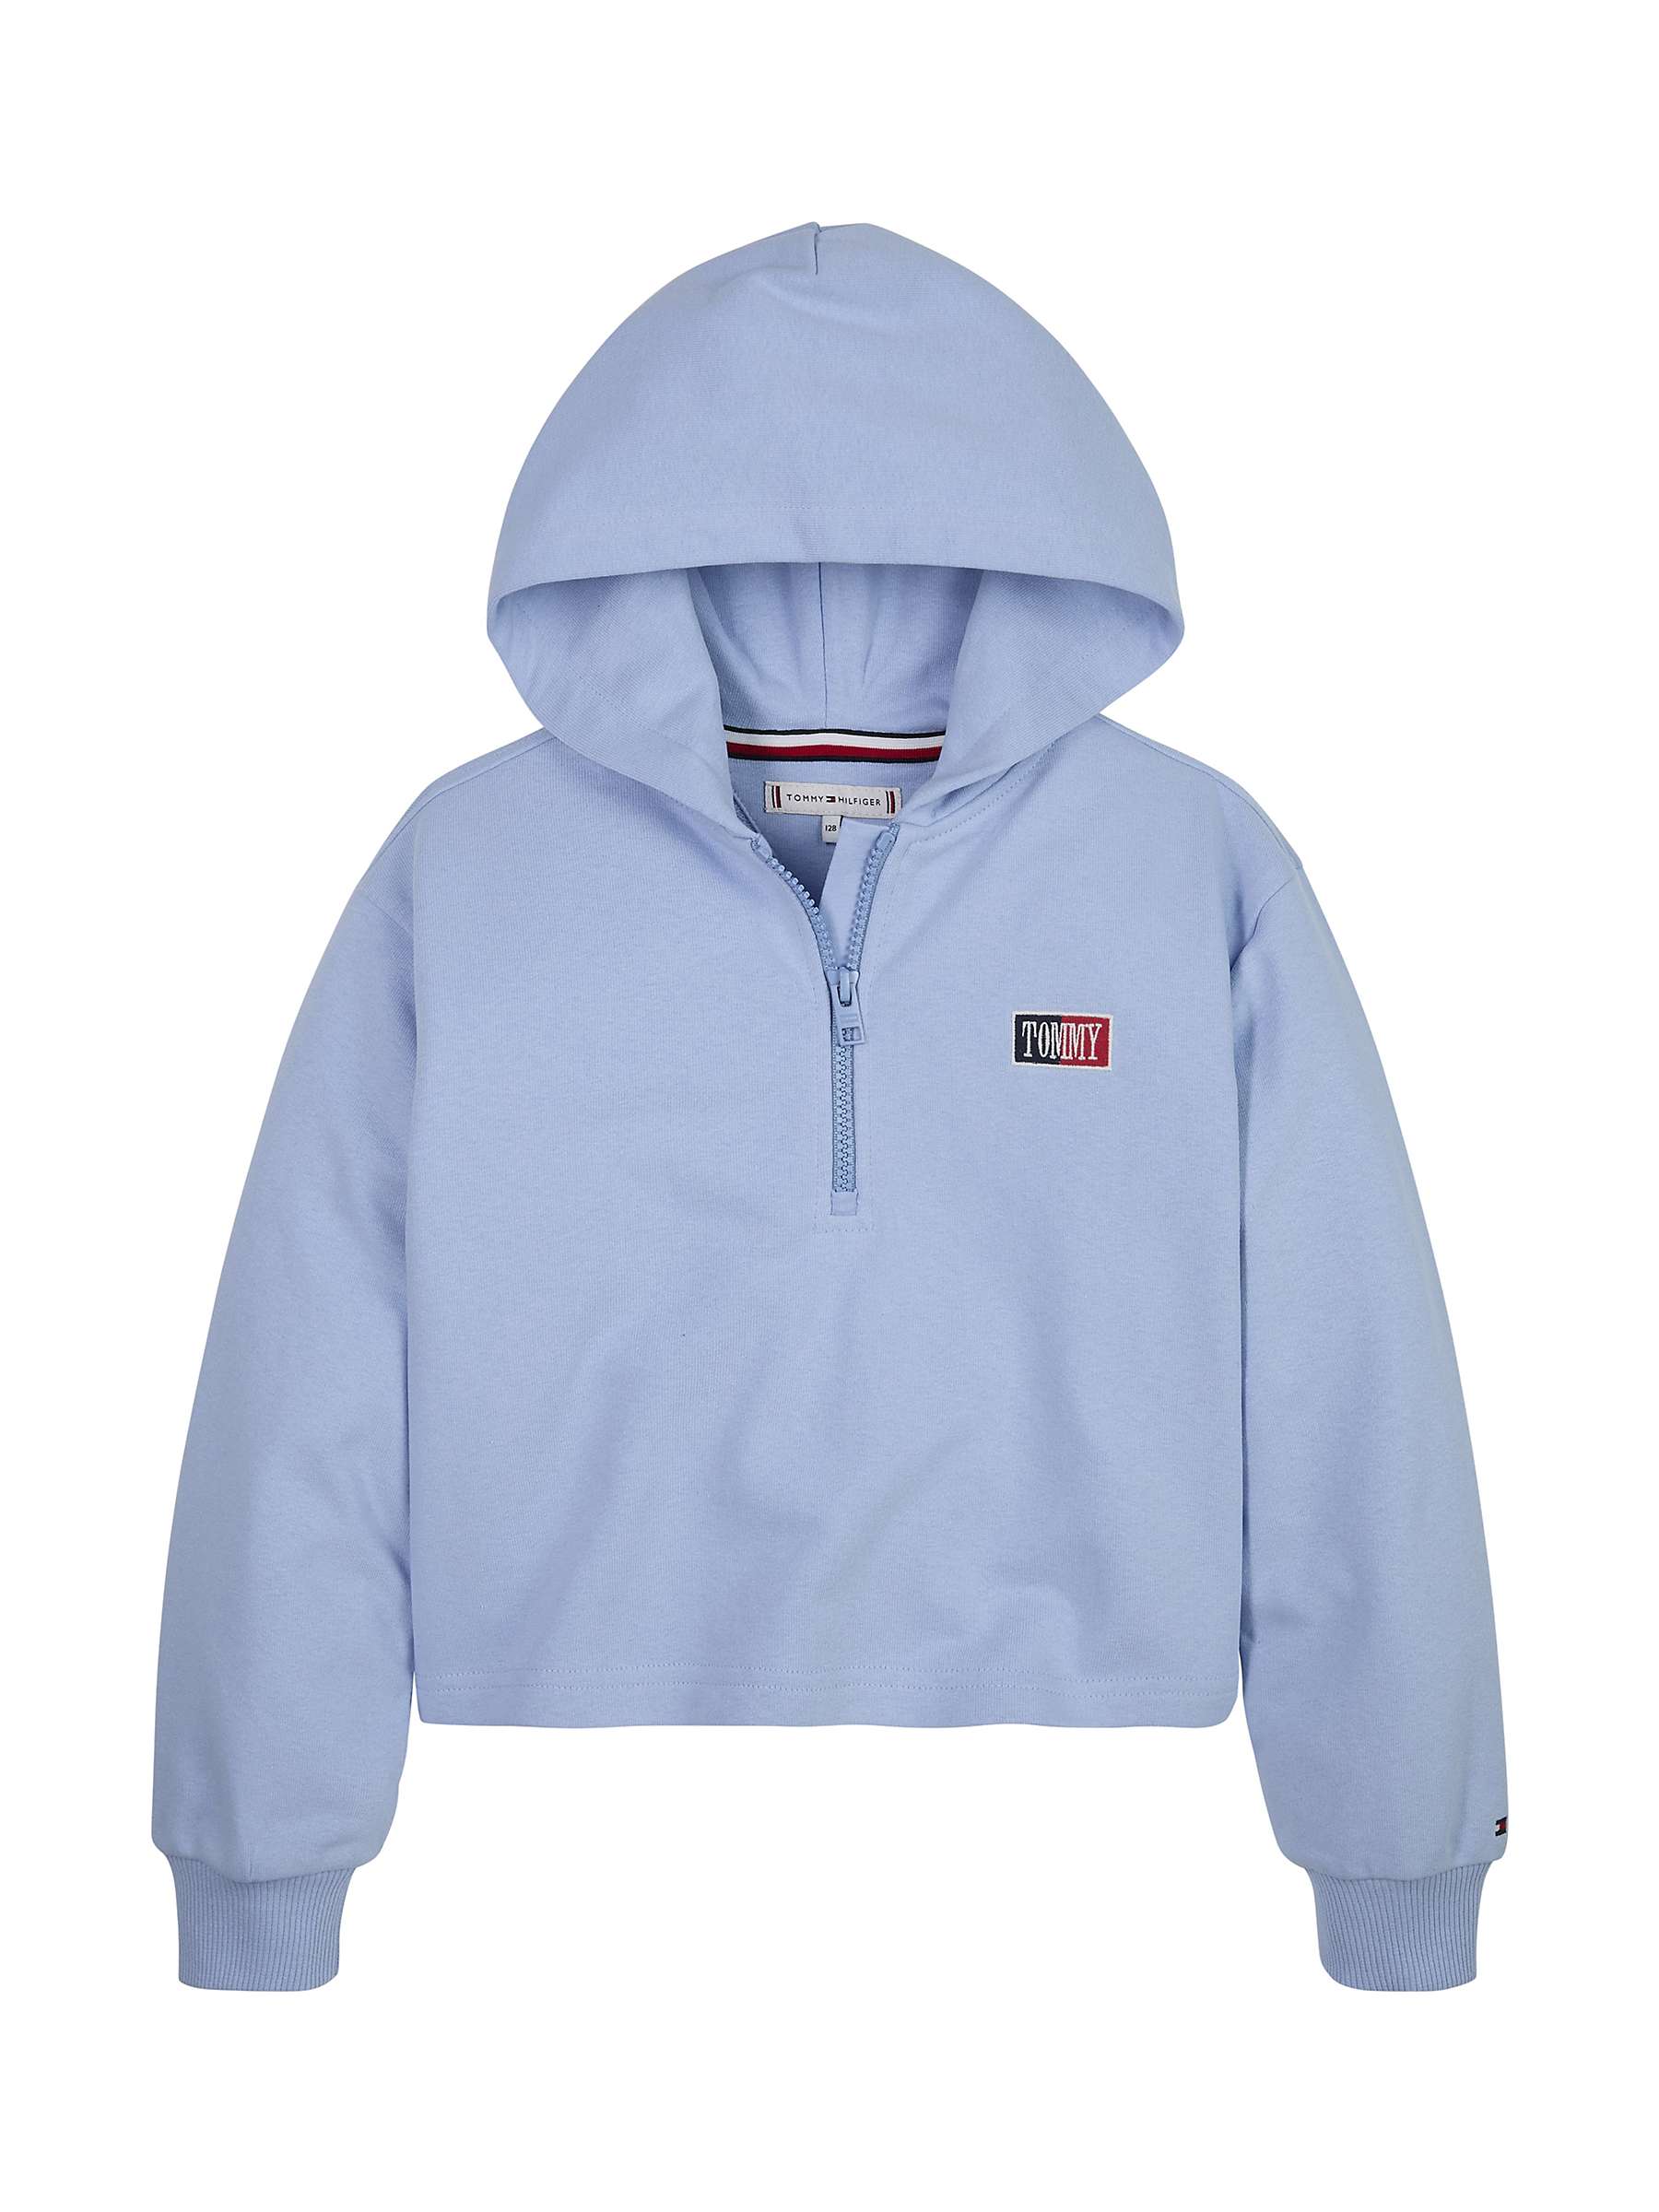 Buy Tommy Hilfiger Kids' Timeless Tommy Hoodie, Pearly Blue Online at johnlewis.com